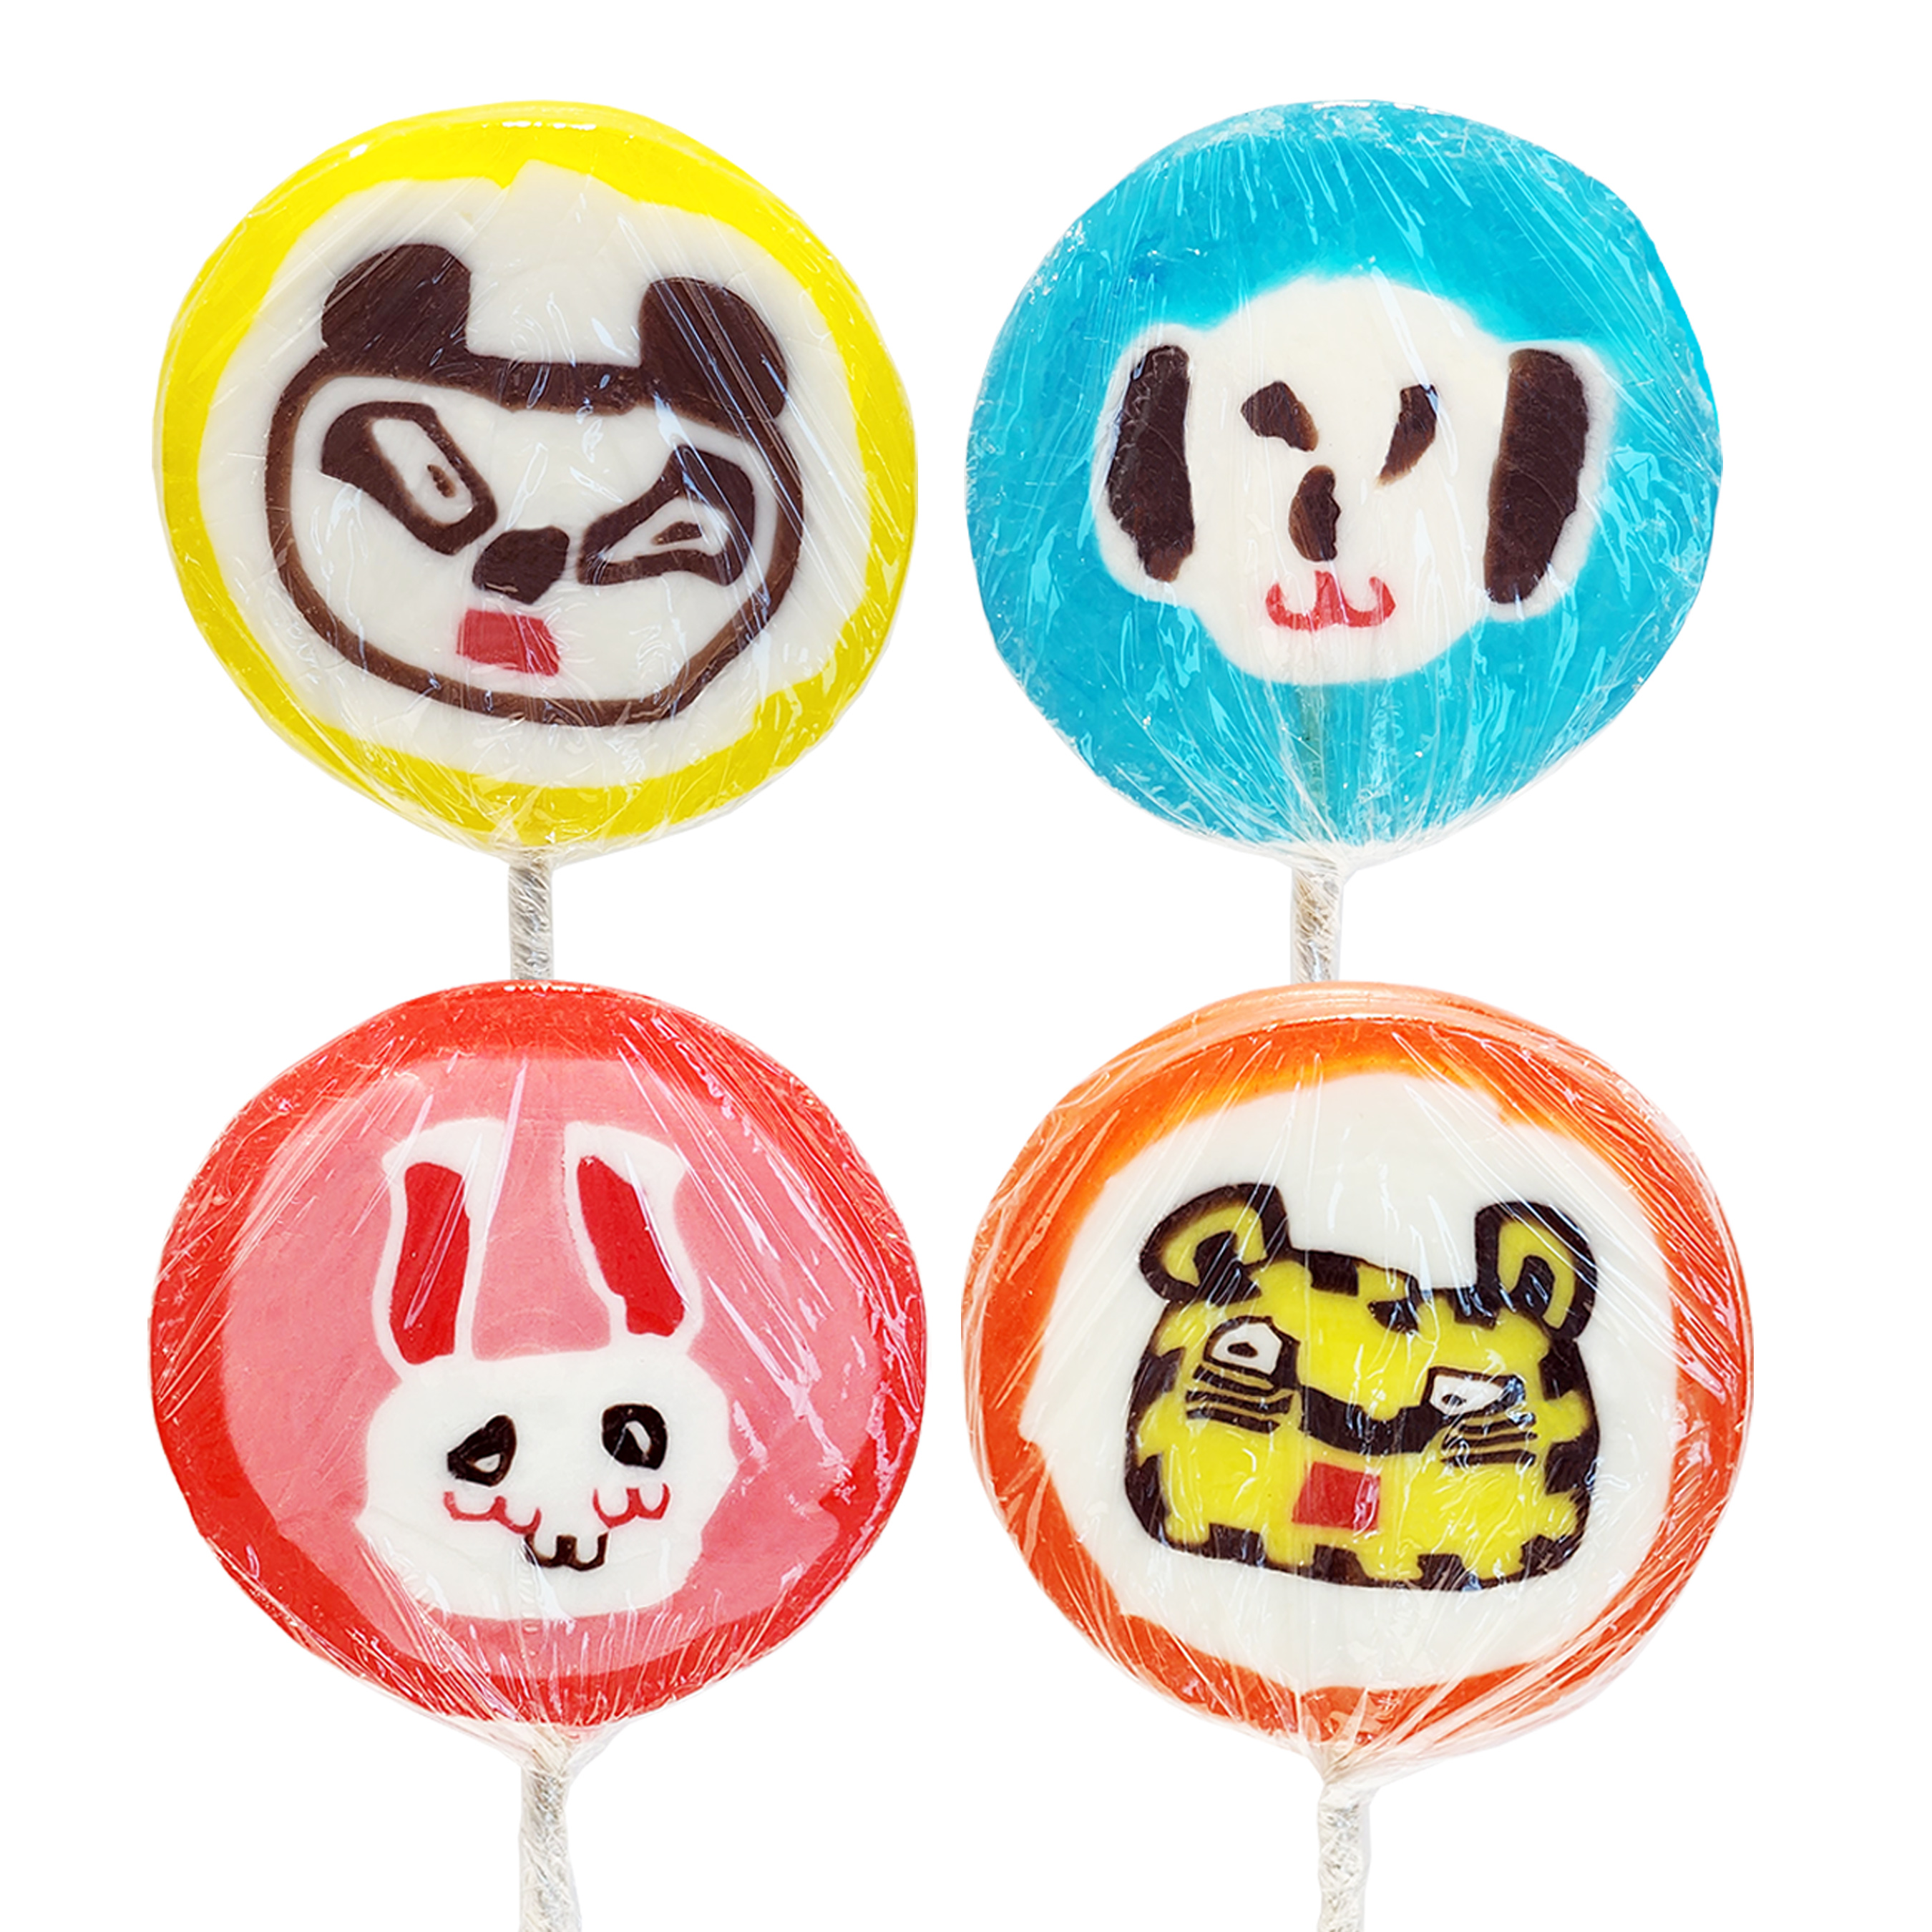 popular product includes our Jumbo Animal lollipop with four varying shapes. 90 grams. 20 pieces in a bag